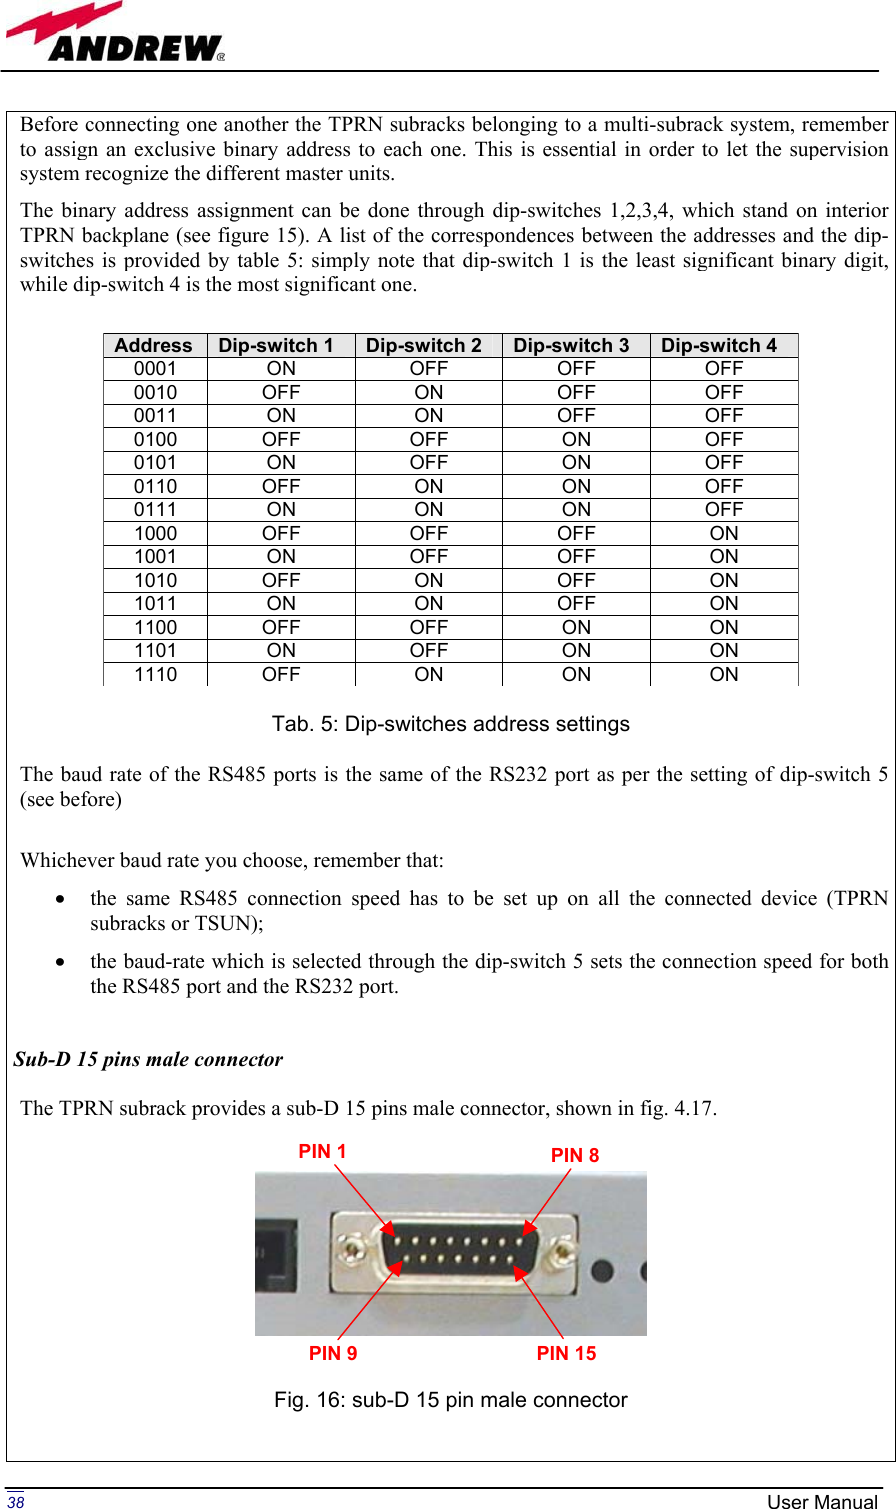 Page 38 of Andrew Wireless Innovations Group BCP-TFAM23 Model TFAM23 Downlink Booster User Manual MN024 04 rev3